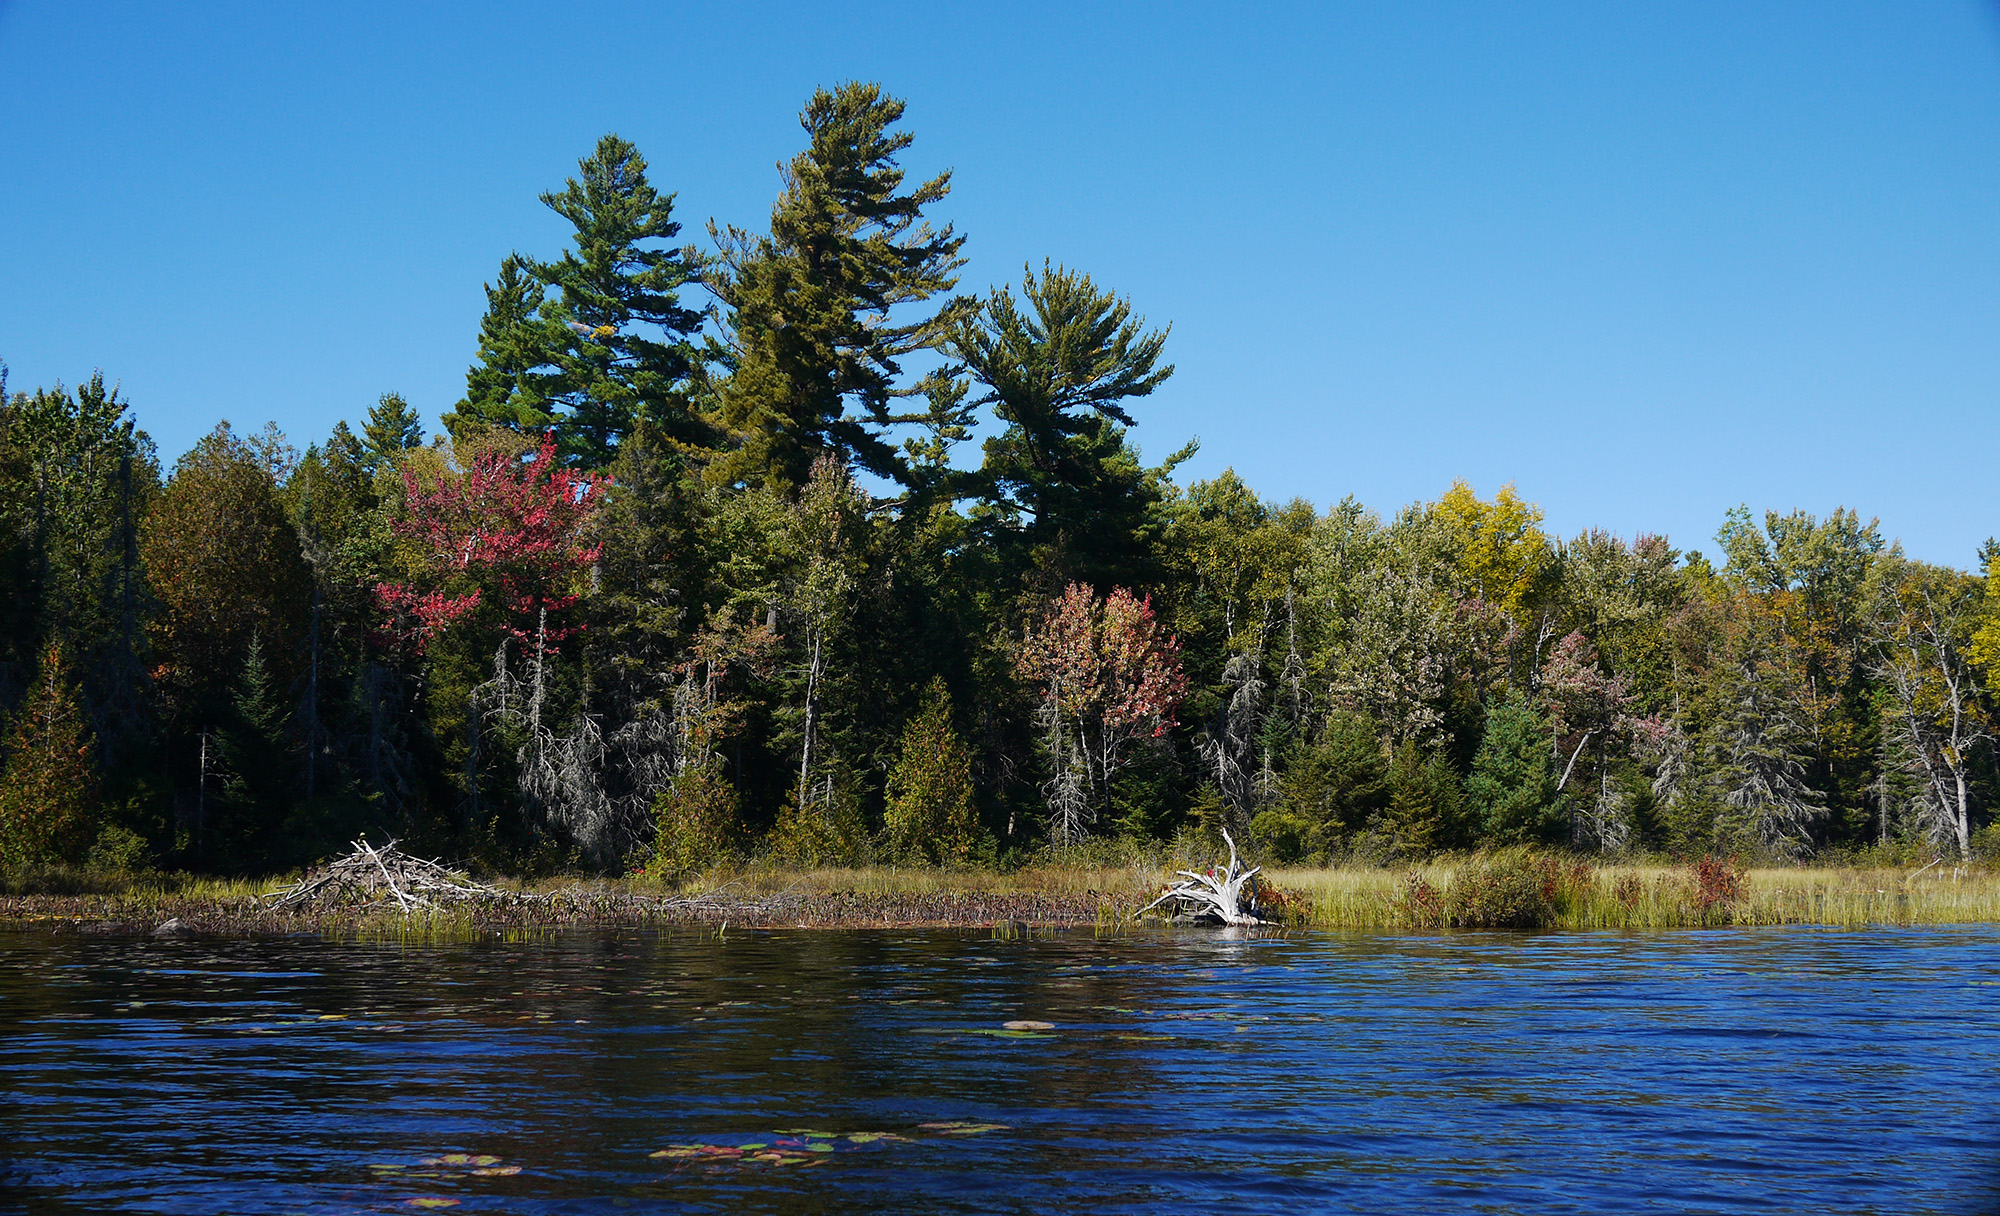 green trees with hints of red and yellow along a river's edge, under a clear blue sky